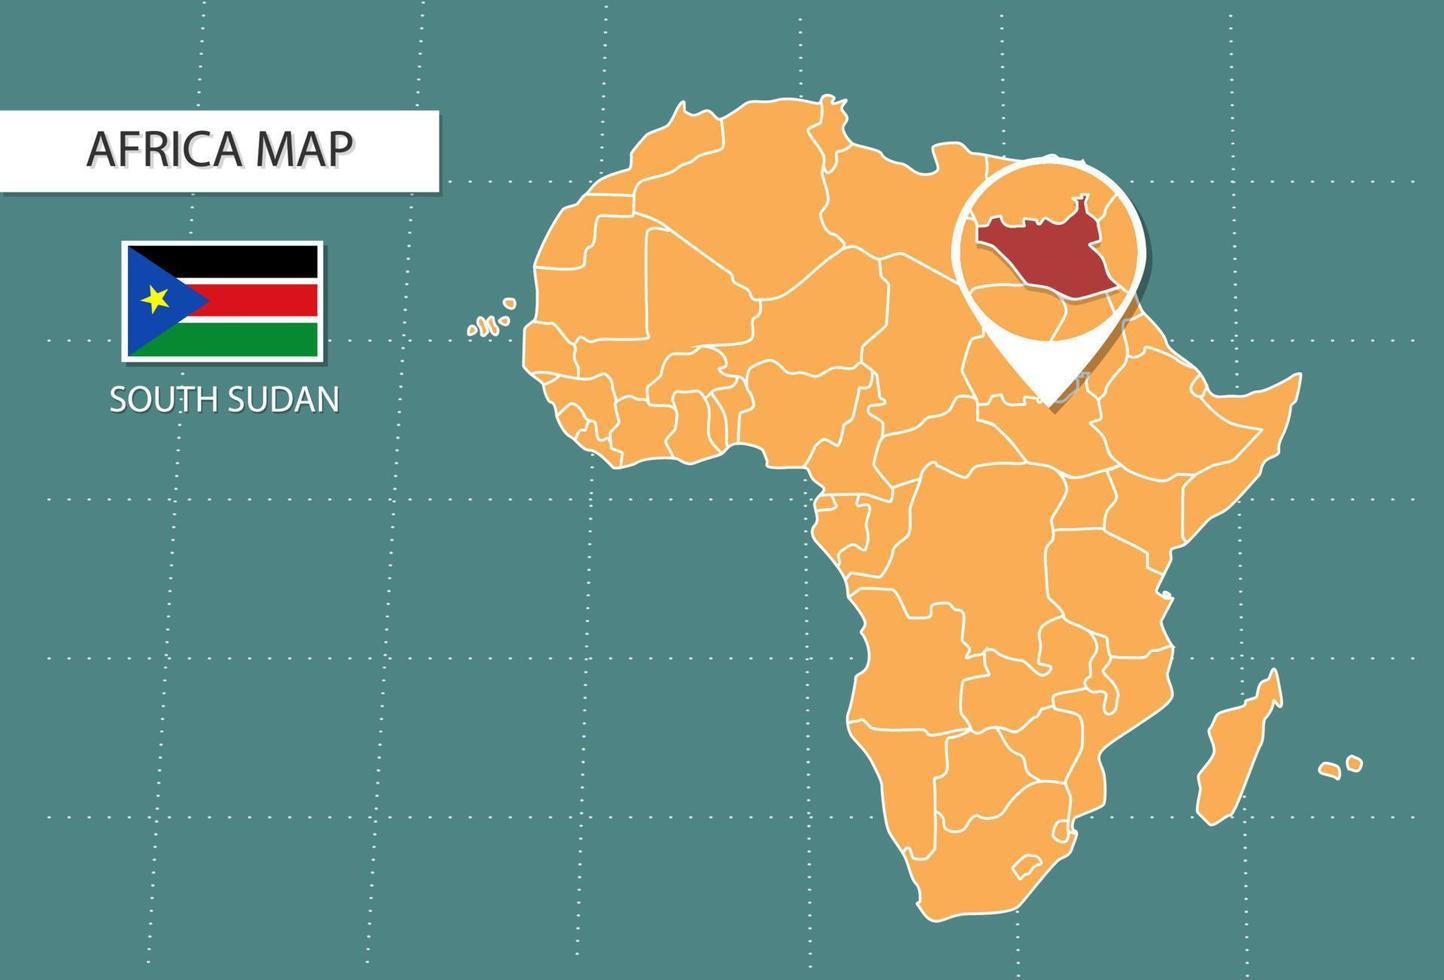 South Sudan map in Africa zoom version, icons showing South Sudan location and flags. vector